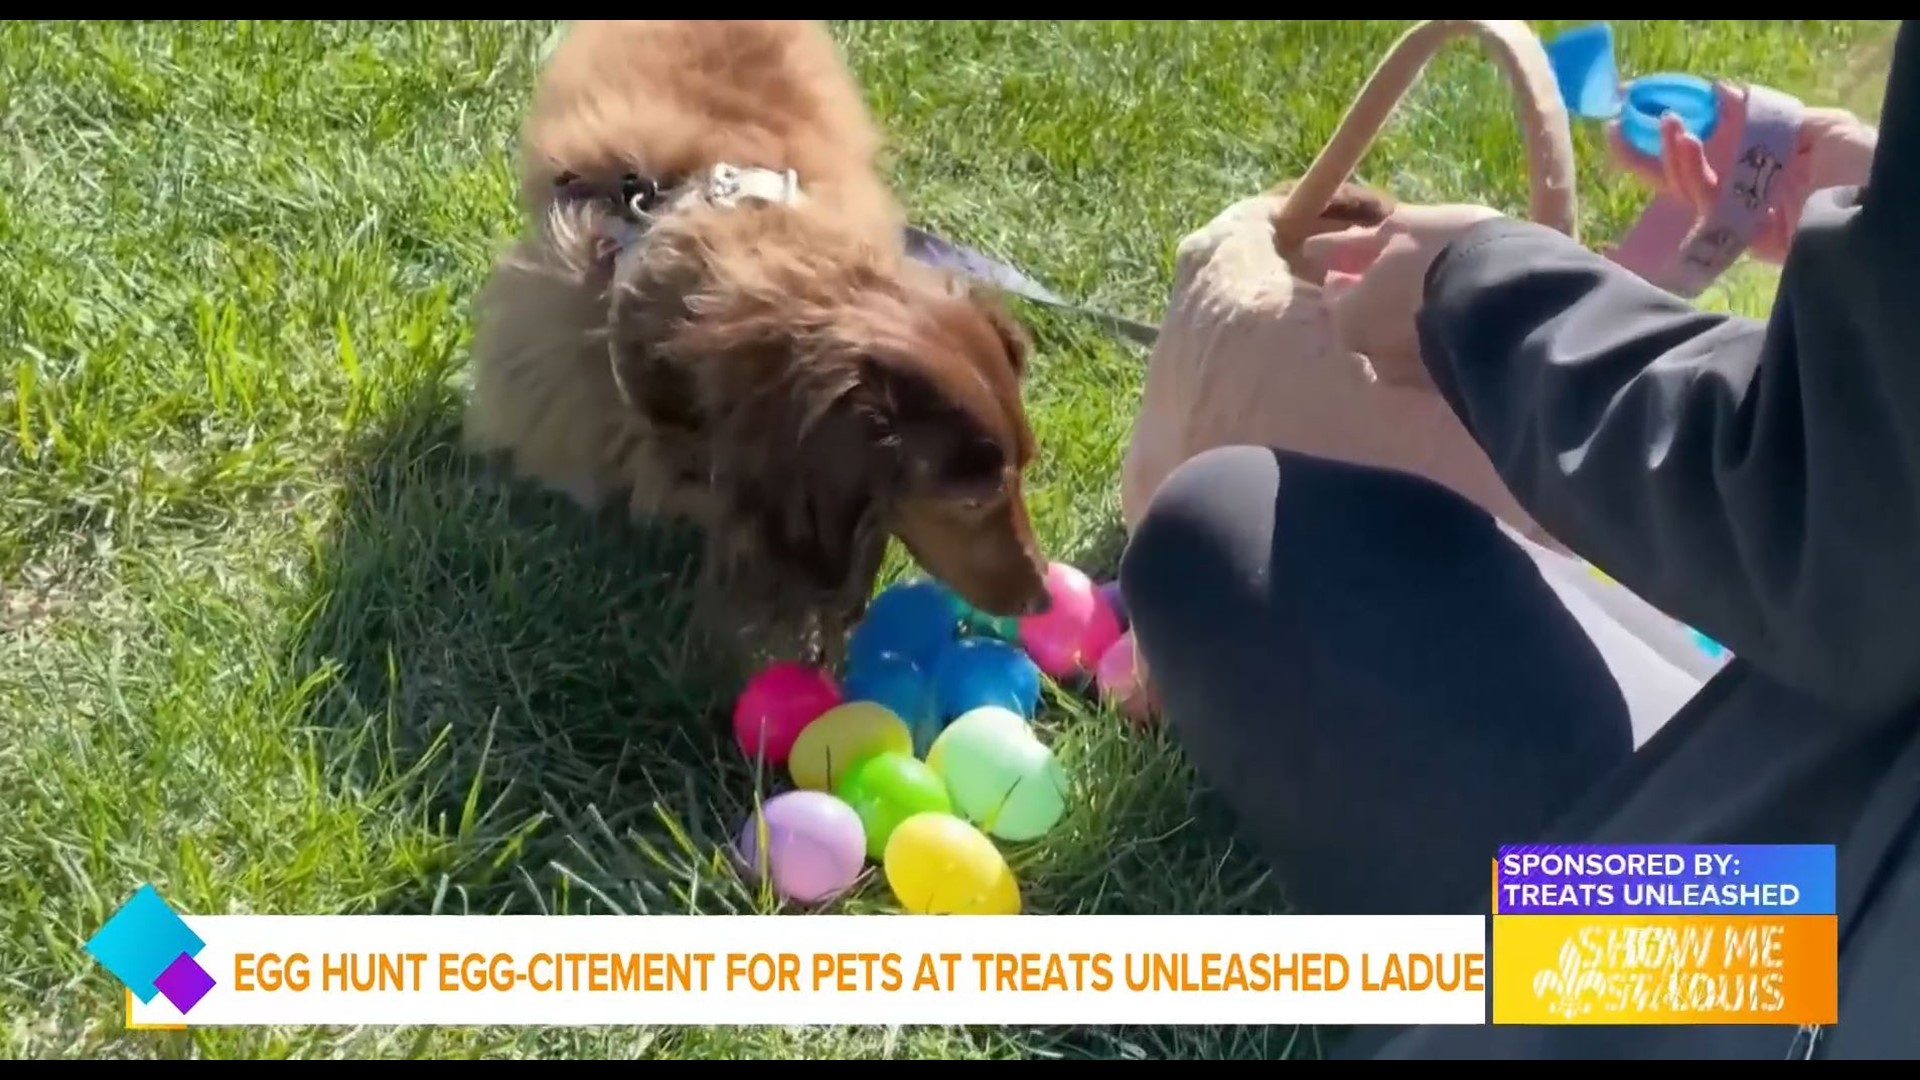 St. Louis' Largest Pet Easter Egg Hunt is this Saturday at Treats Unleashed Ladue.